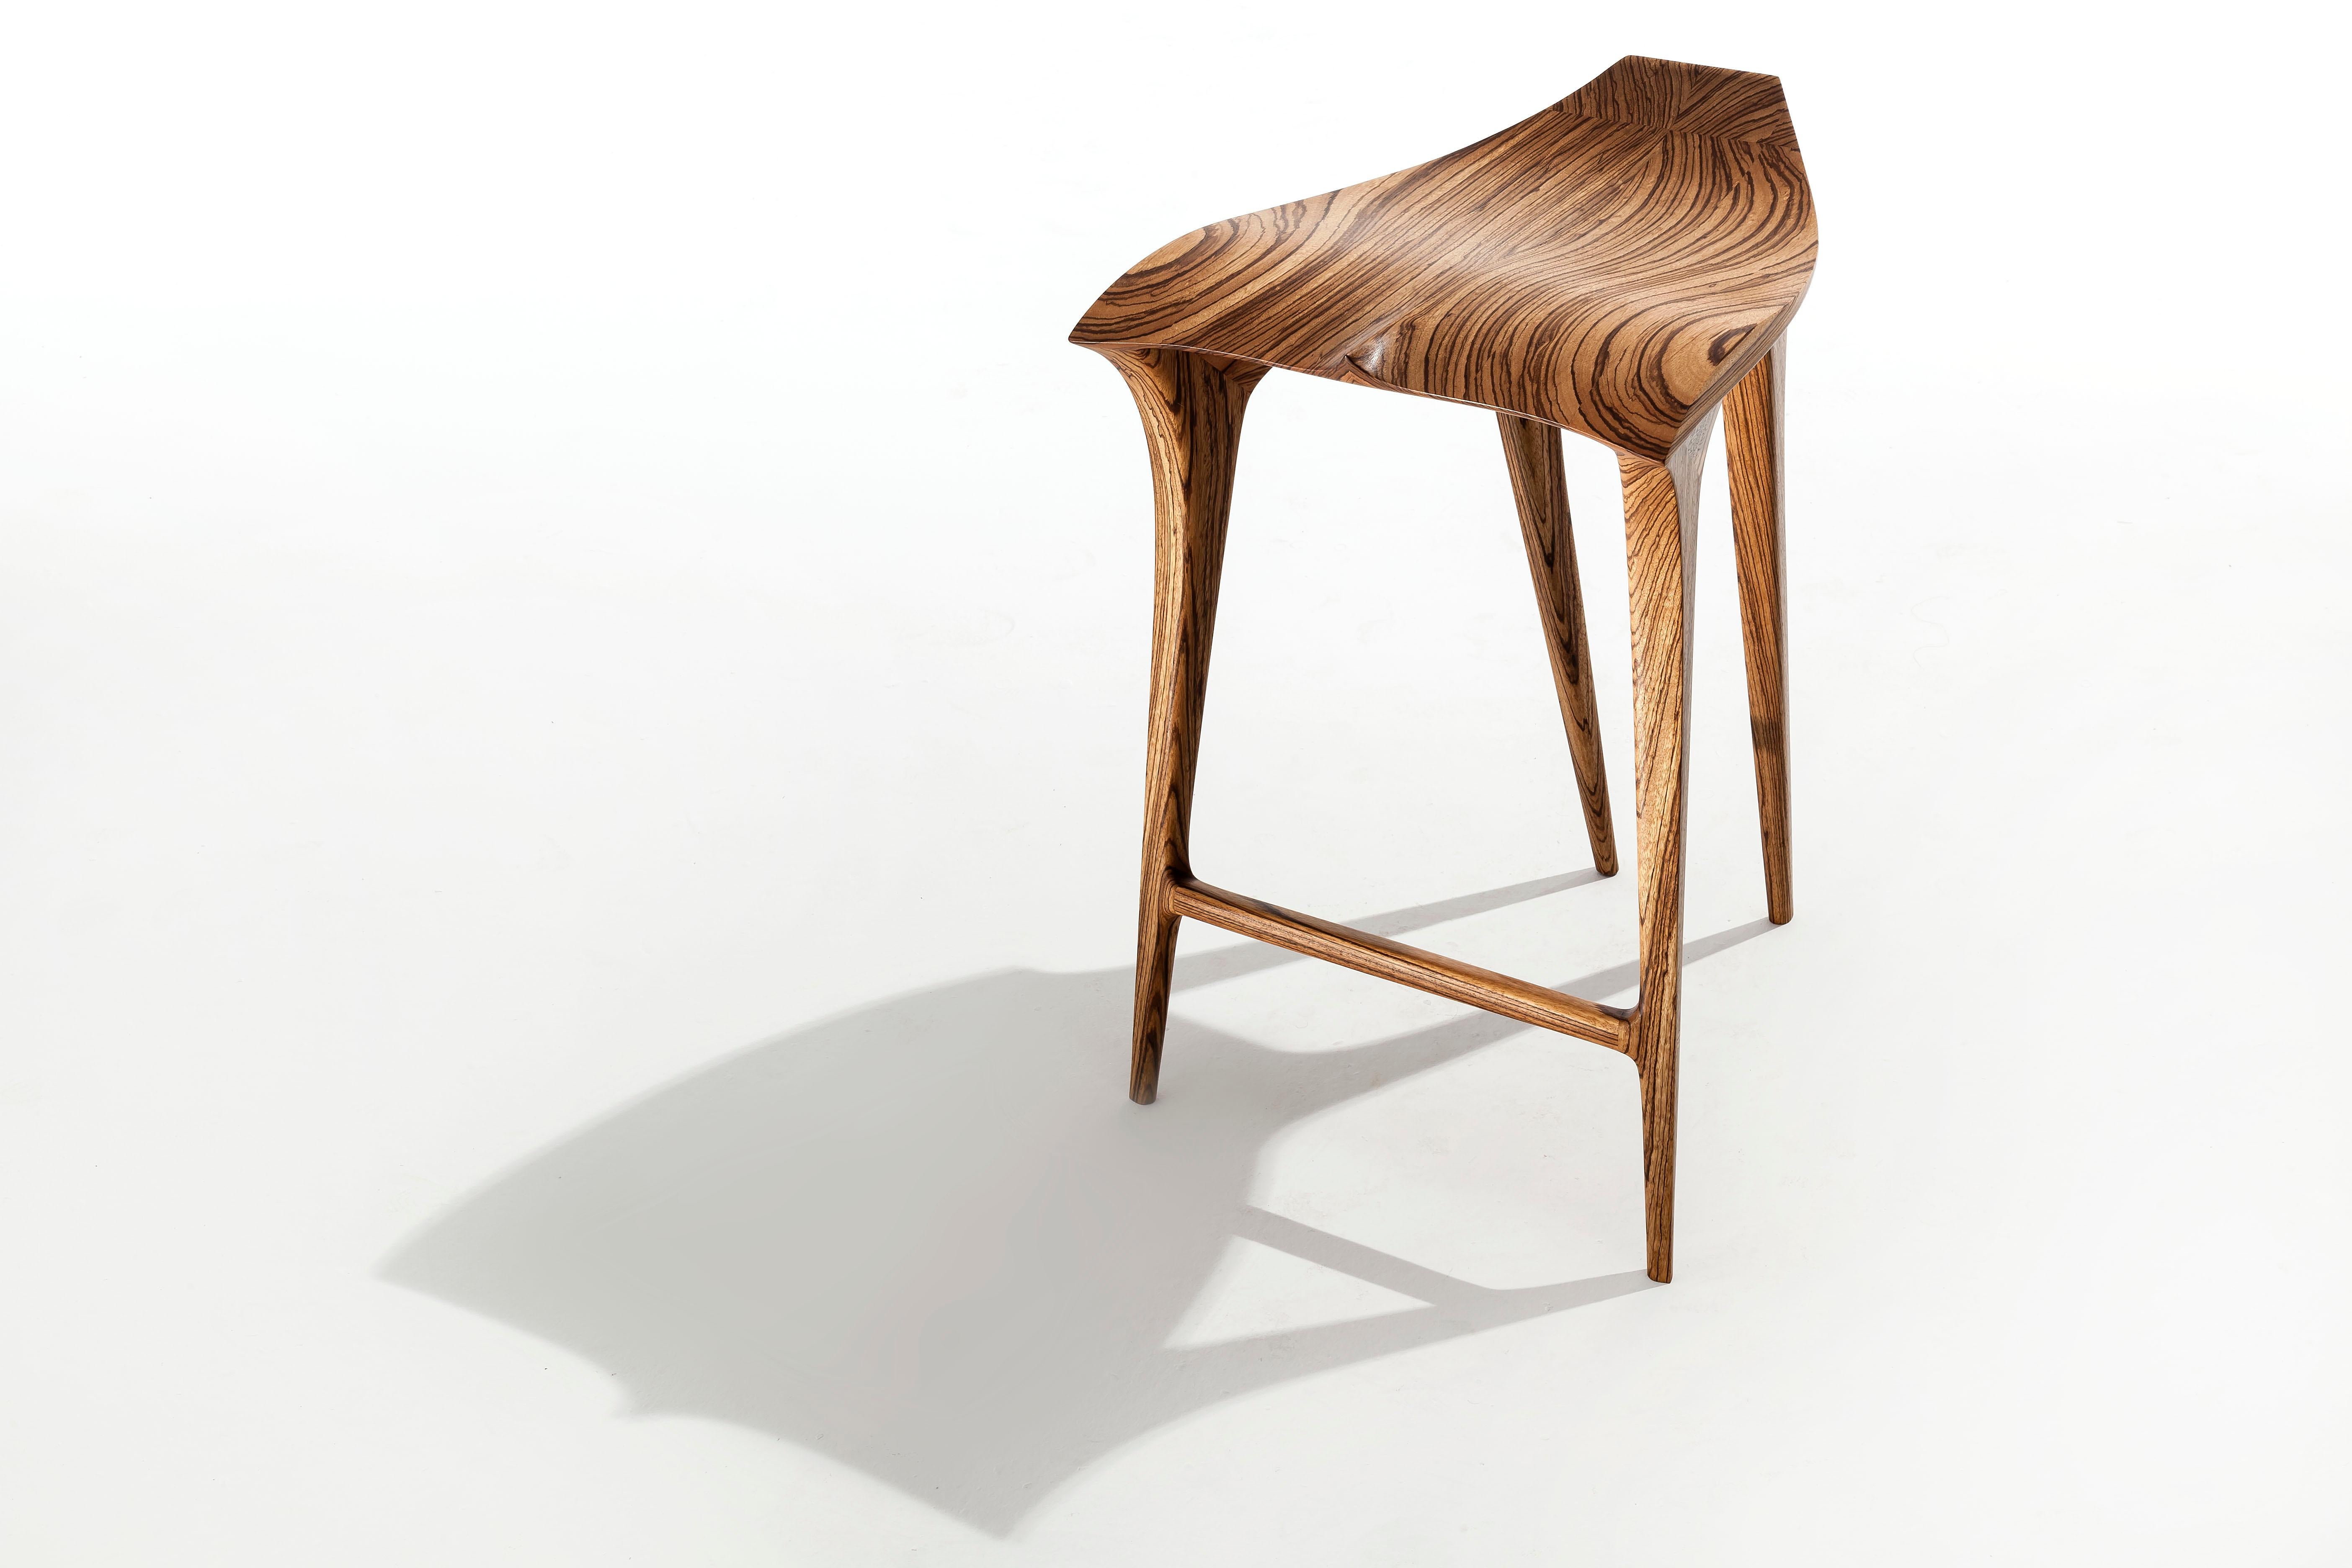 The Barba Negra stool was created as an interpretation of the sensations aroused by the contact with the marine universe that generated a curvilinear, fluid and dynamic design of the piece. 

The solid wood is cut into several parts to be better